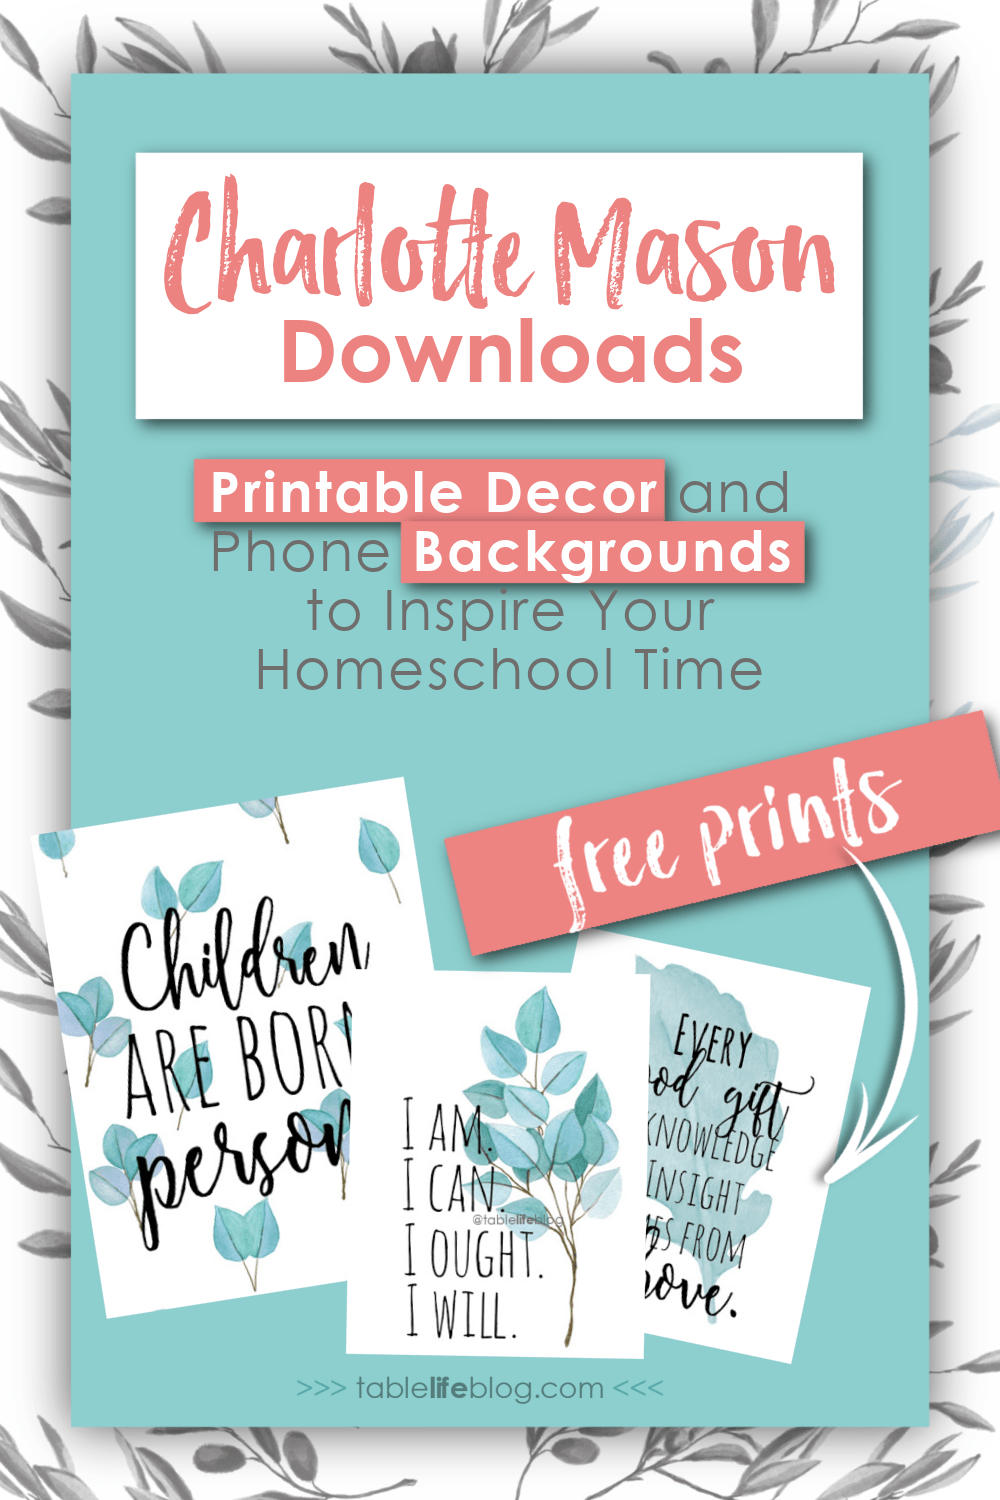 Looking for some inspiration and encouragement for your homeschool journey? Today I'm sharing some of my favorite Charlotte Mason quotes with you. Better yet, I've created graphics for social sharing, phone backgrounds, and printables with these quotes.